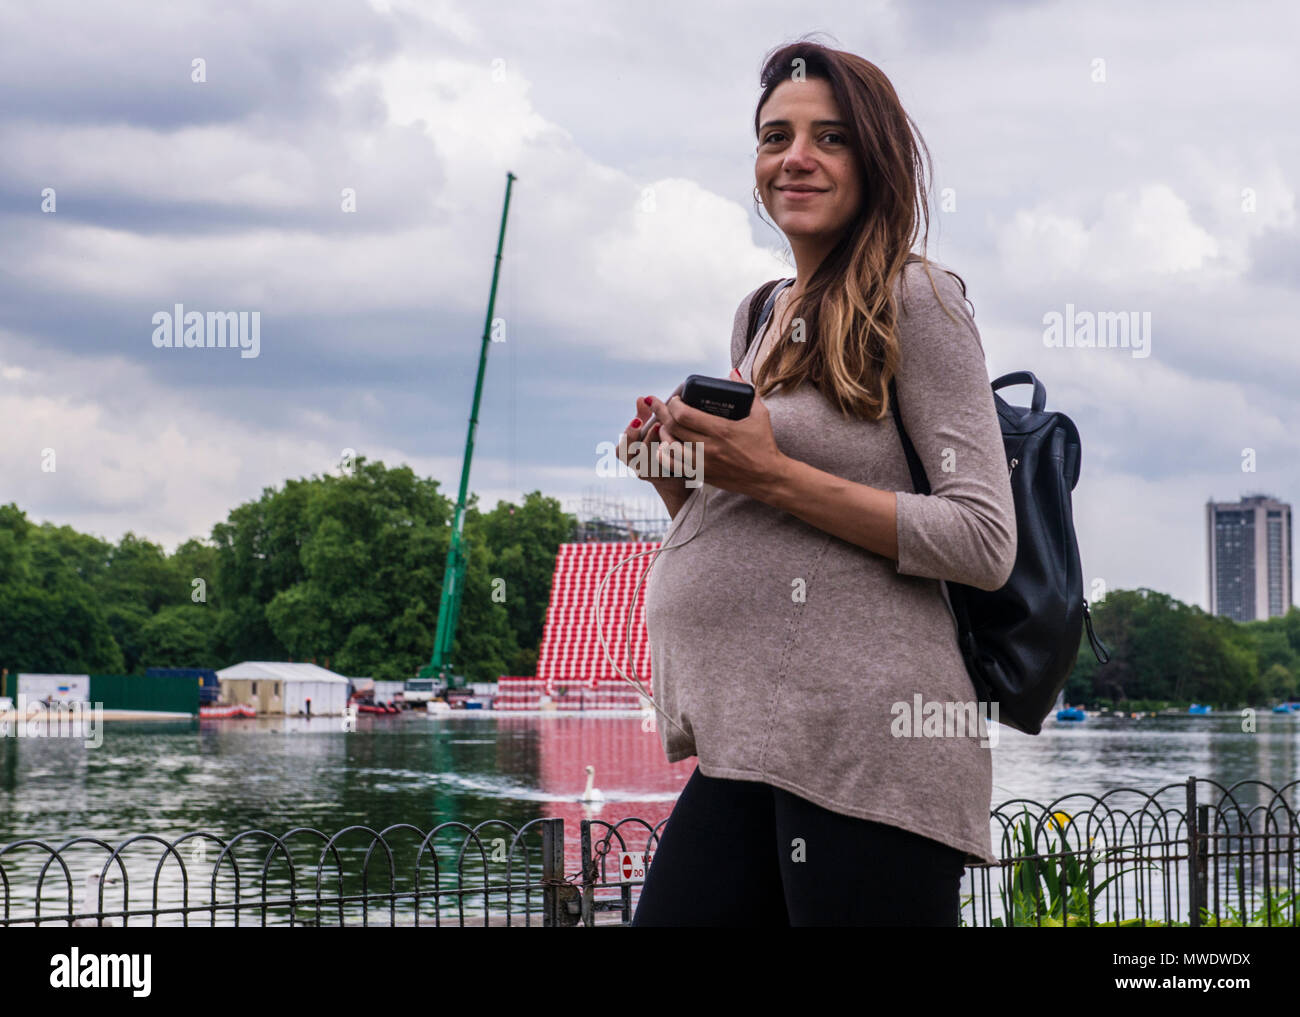 London, UK. 1st Jun, 2018. UK Weather: Cloudy day at Serpentine lake, Hyde Park.  A young mother-to-be smiles at the camera while enjoying a walk by the lake in Hyde Park, London, by the Princess Diana Memorial. Credit: Ernesto Rogata/Alamy Live News. Stock Photo